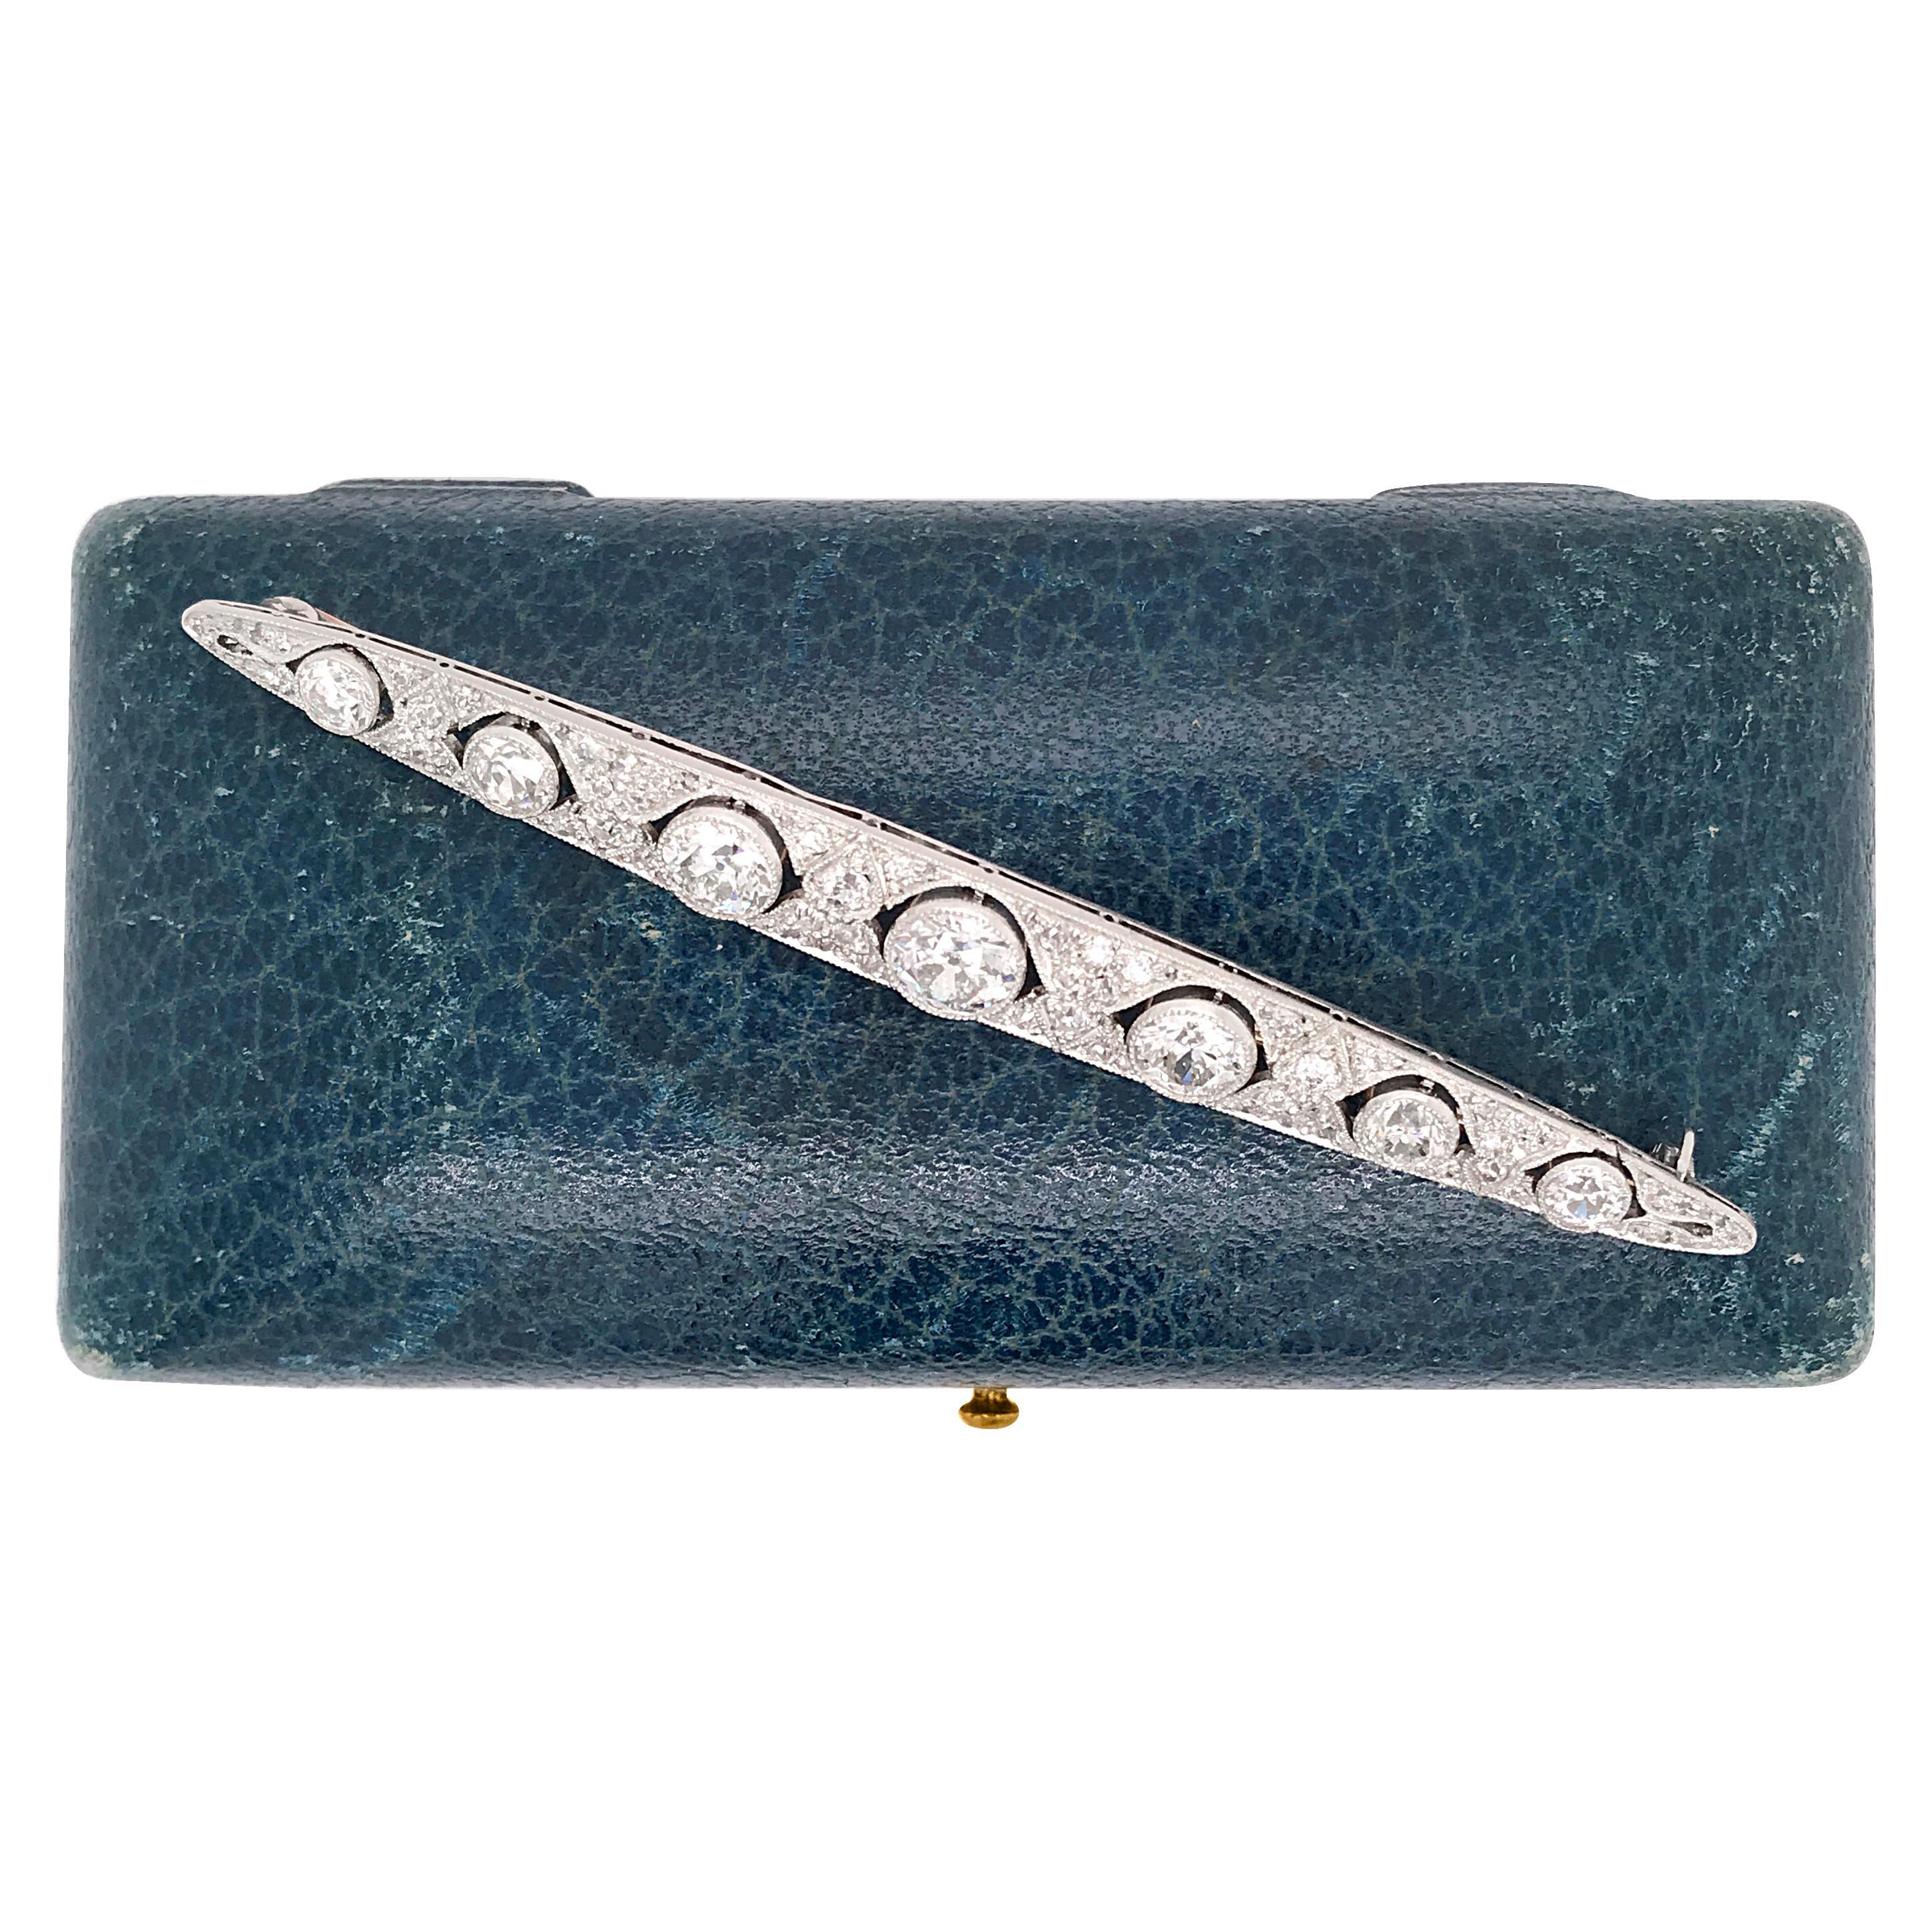 This antique Art Deco diamond bar brooch is crafted in solid platinum. Center with a round diamond approx. 1.2cts graded I color and VS clarity and mounted within an exquisite filigree setting with heart shape profiles. The eye-catching center stone